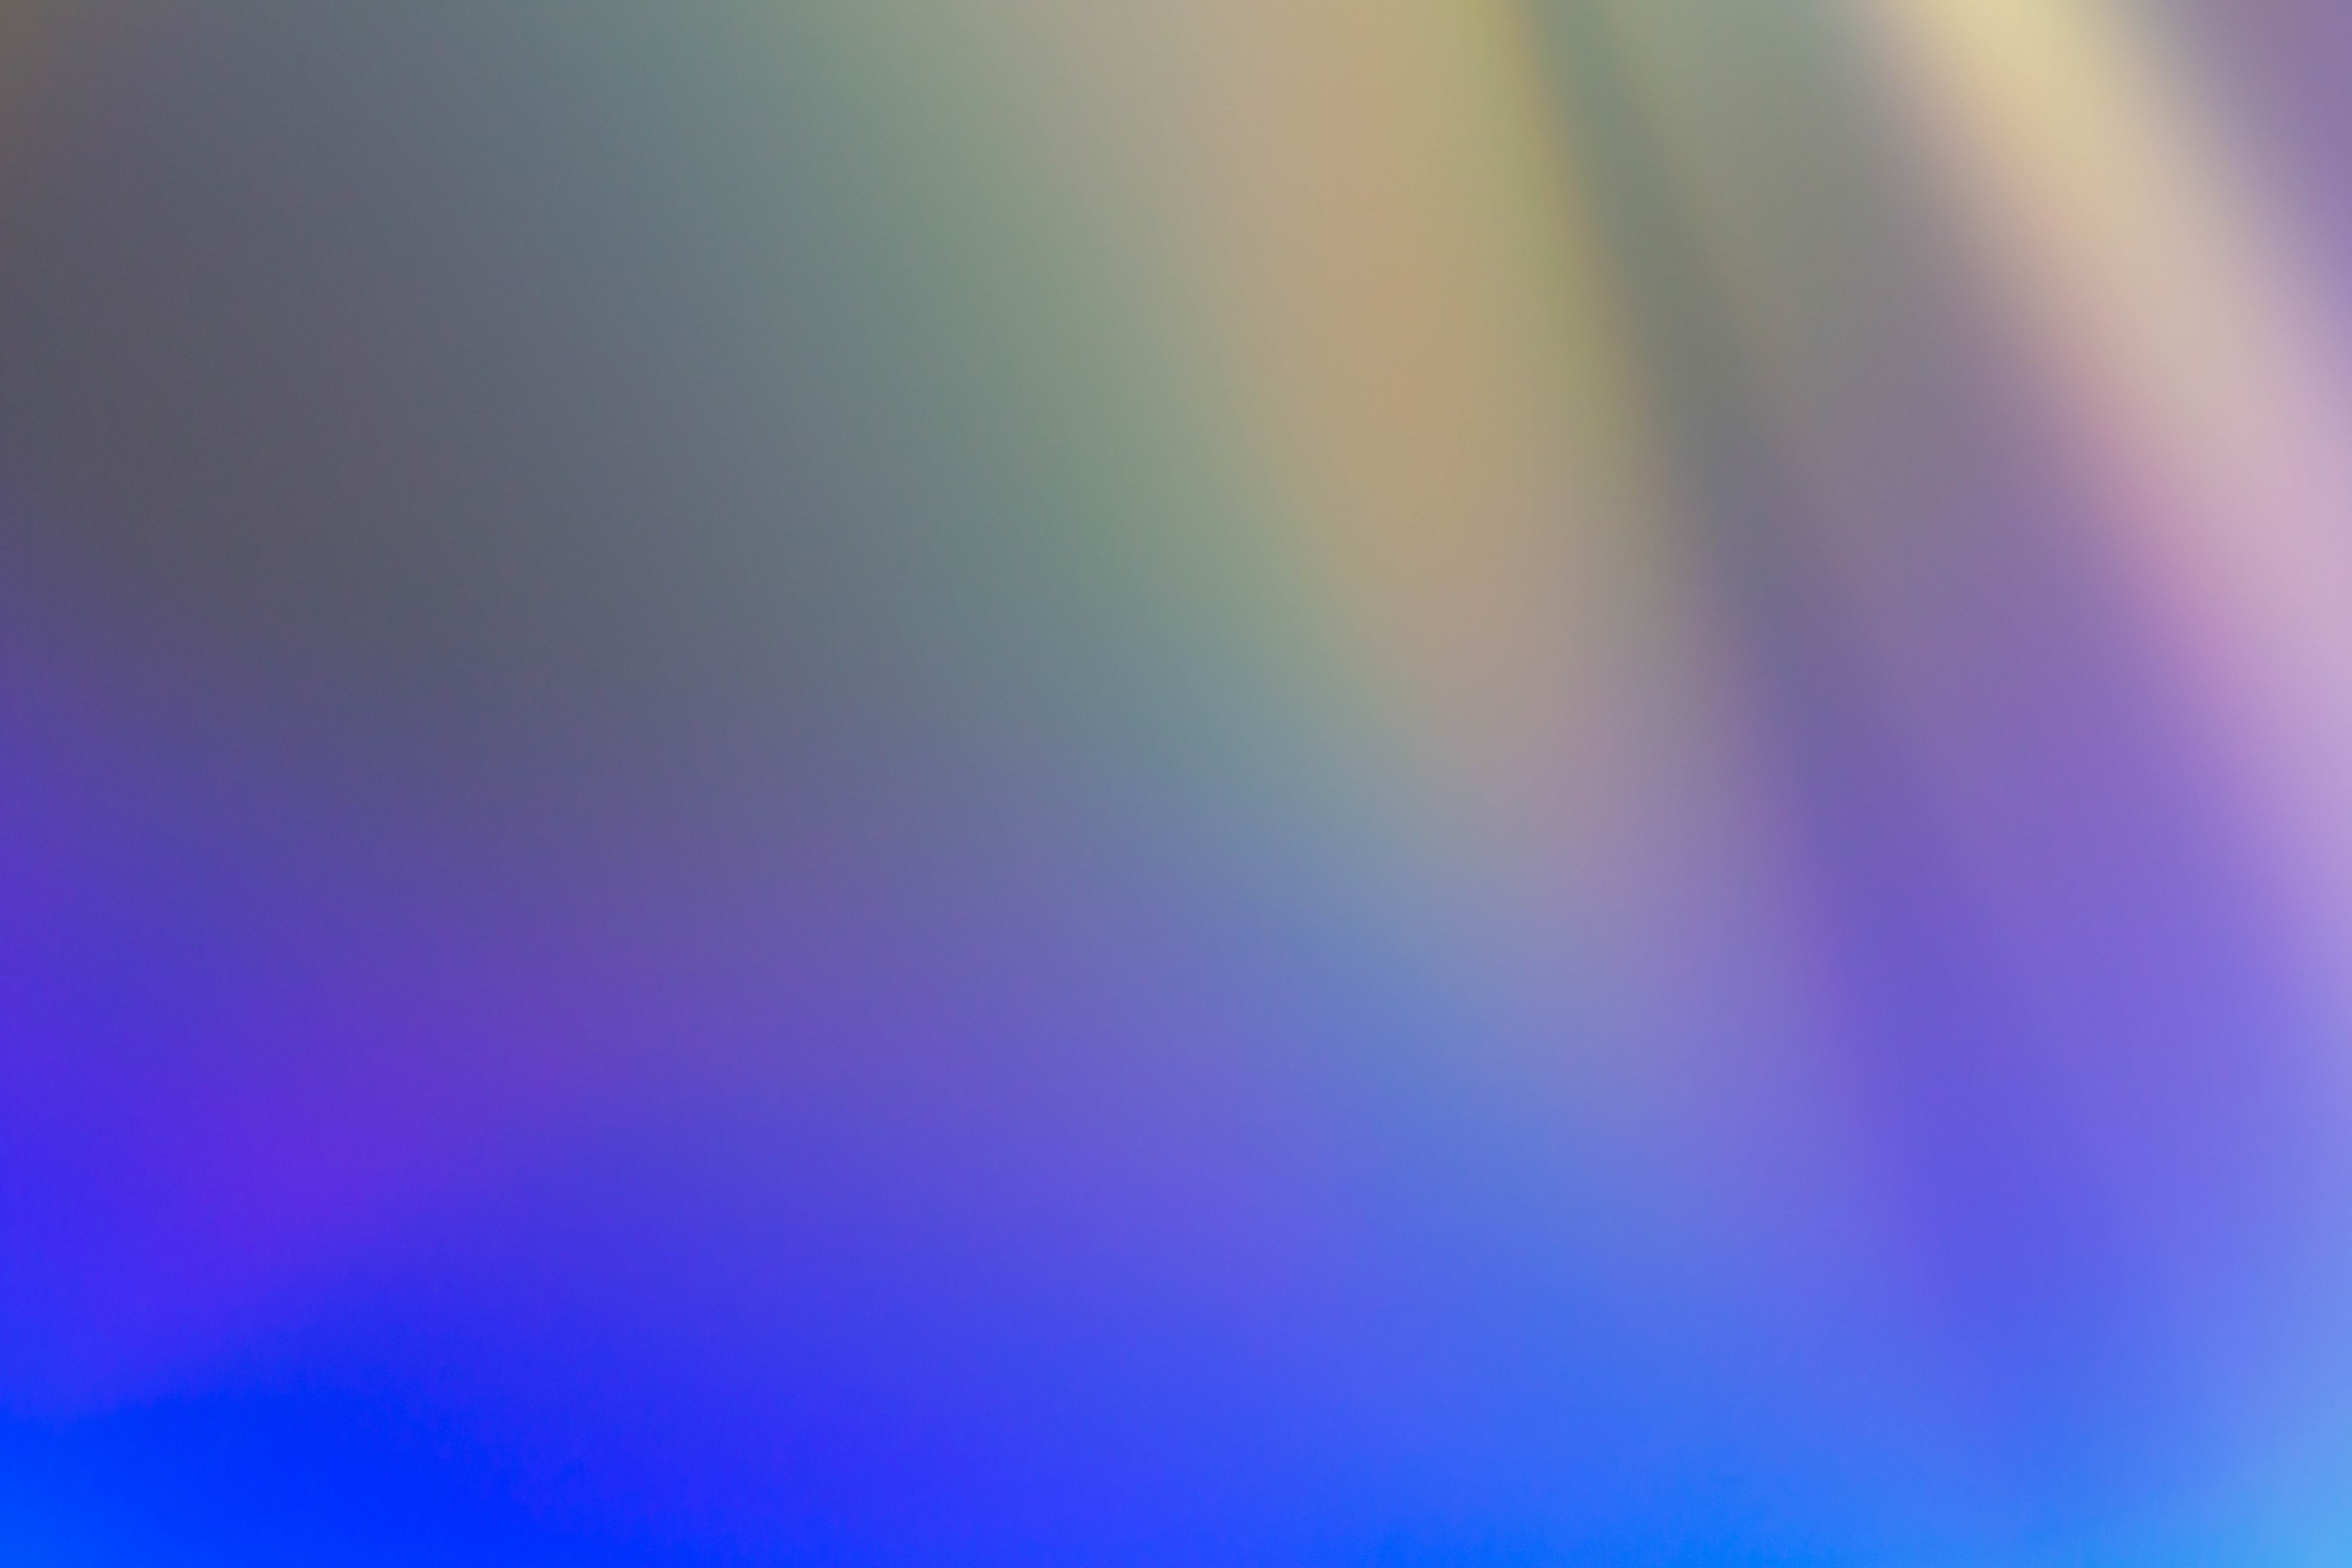 https://negativespace.co/wp-content/uploads/2019/06/negative-space-soft-colorful-gradient-background.jpg